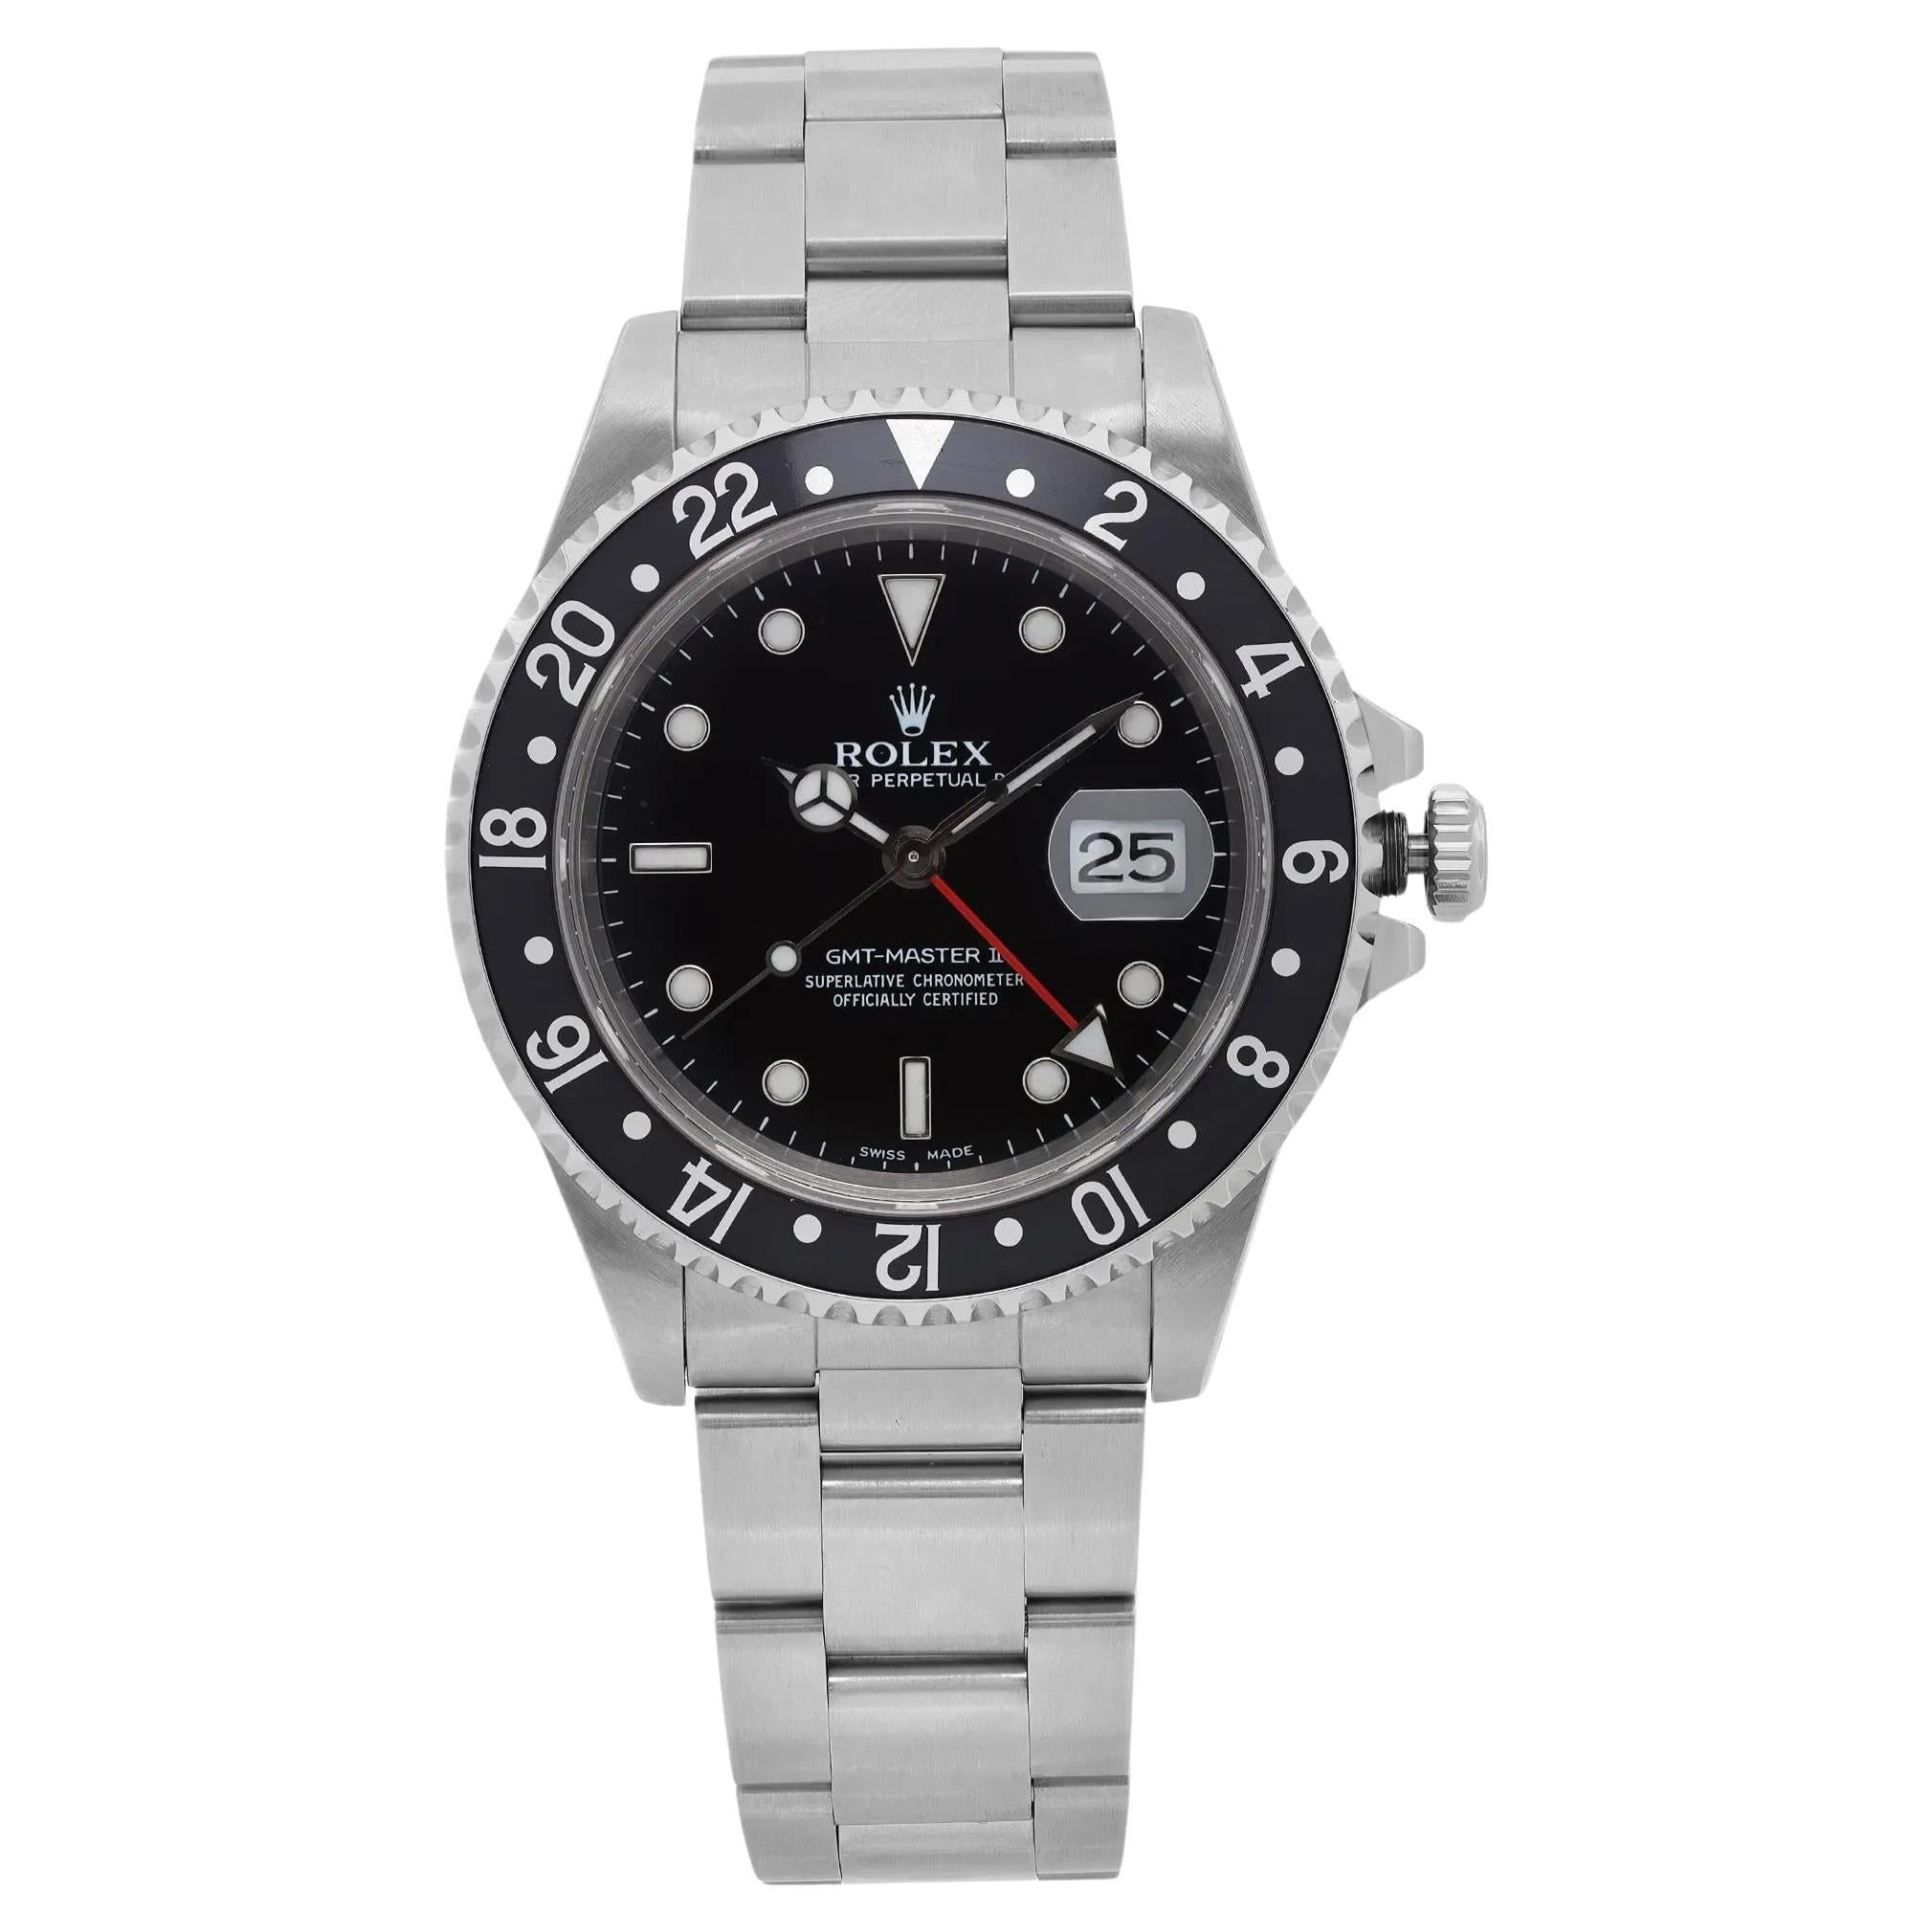 Rolex GMT-Master II Stainless Steel Black Dial Automatic Men Watch 16710